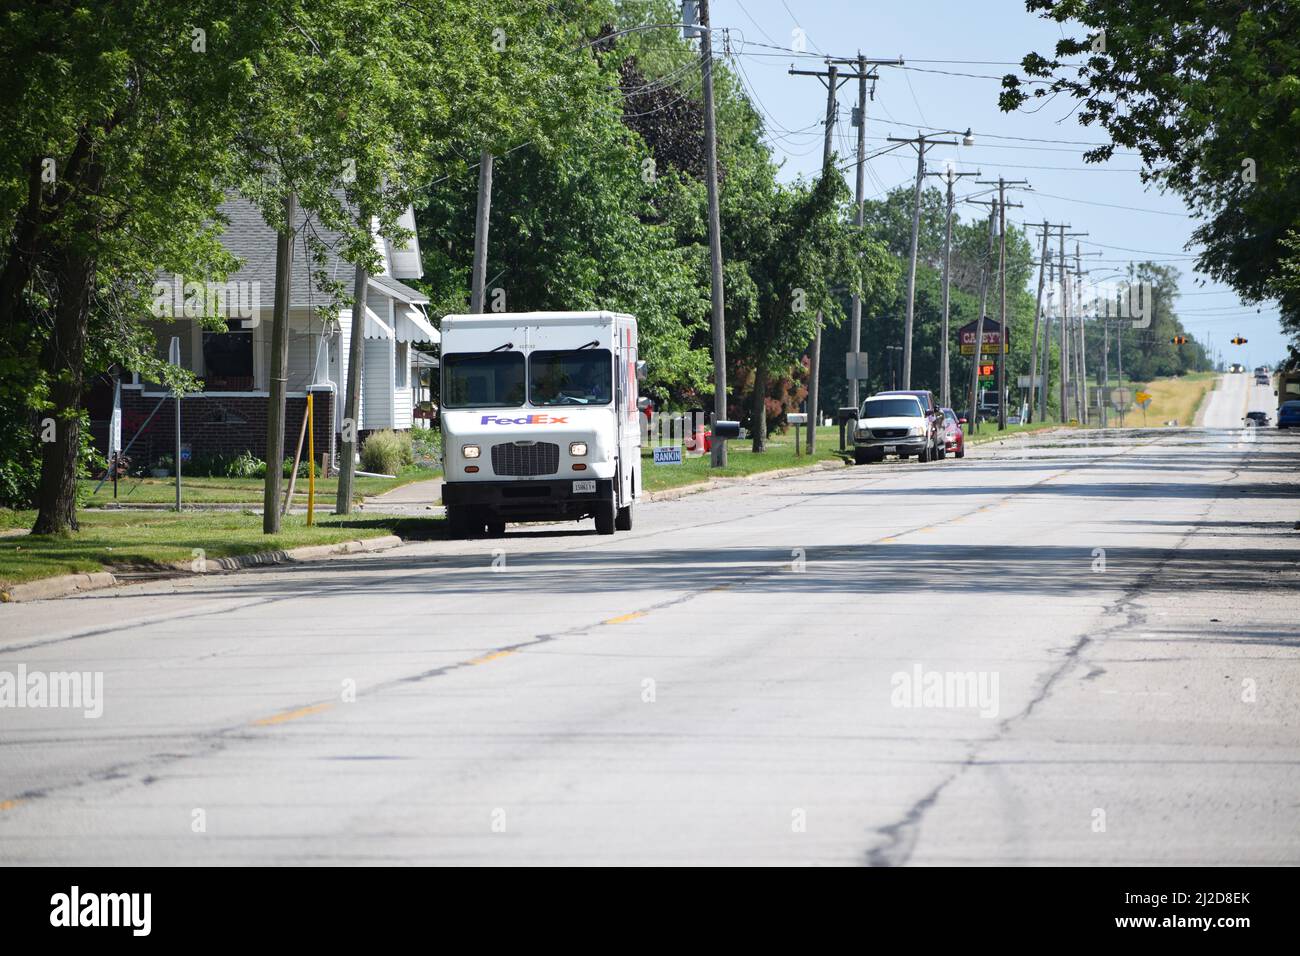 A FedEx delivery truck parked on Illinois Route 49 in the small town of Rankin, Illinois Stock Photo